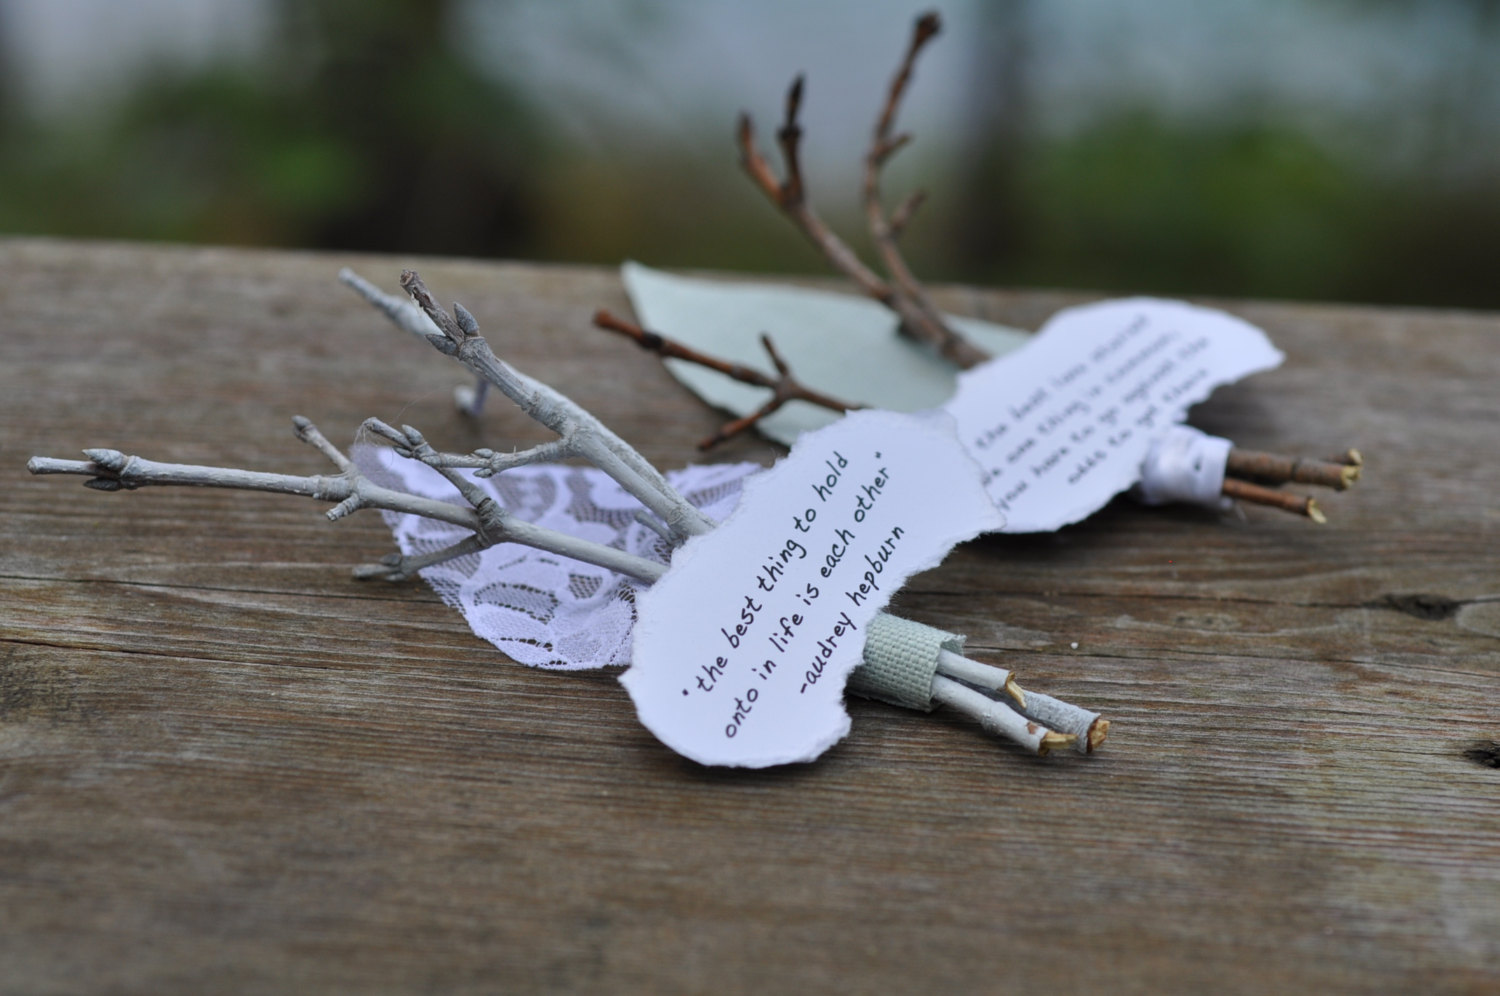 twig boutonniere by lace and twig | Nature Inspired Wedding Ideas | http://wp.me/p1g0if-x0y